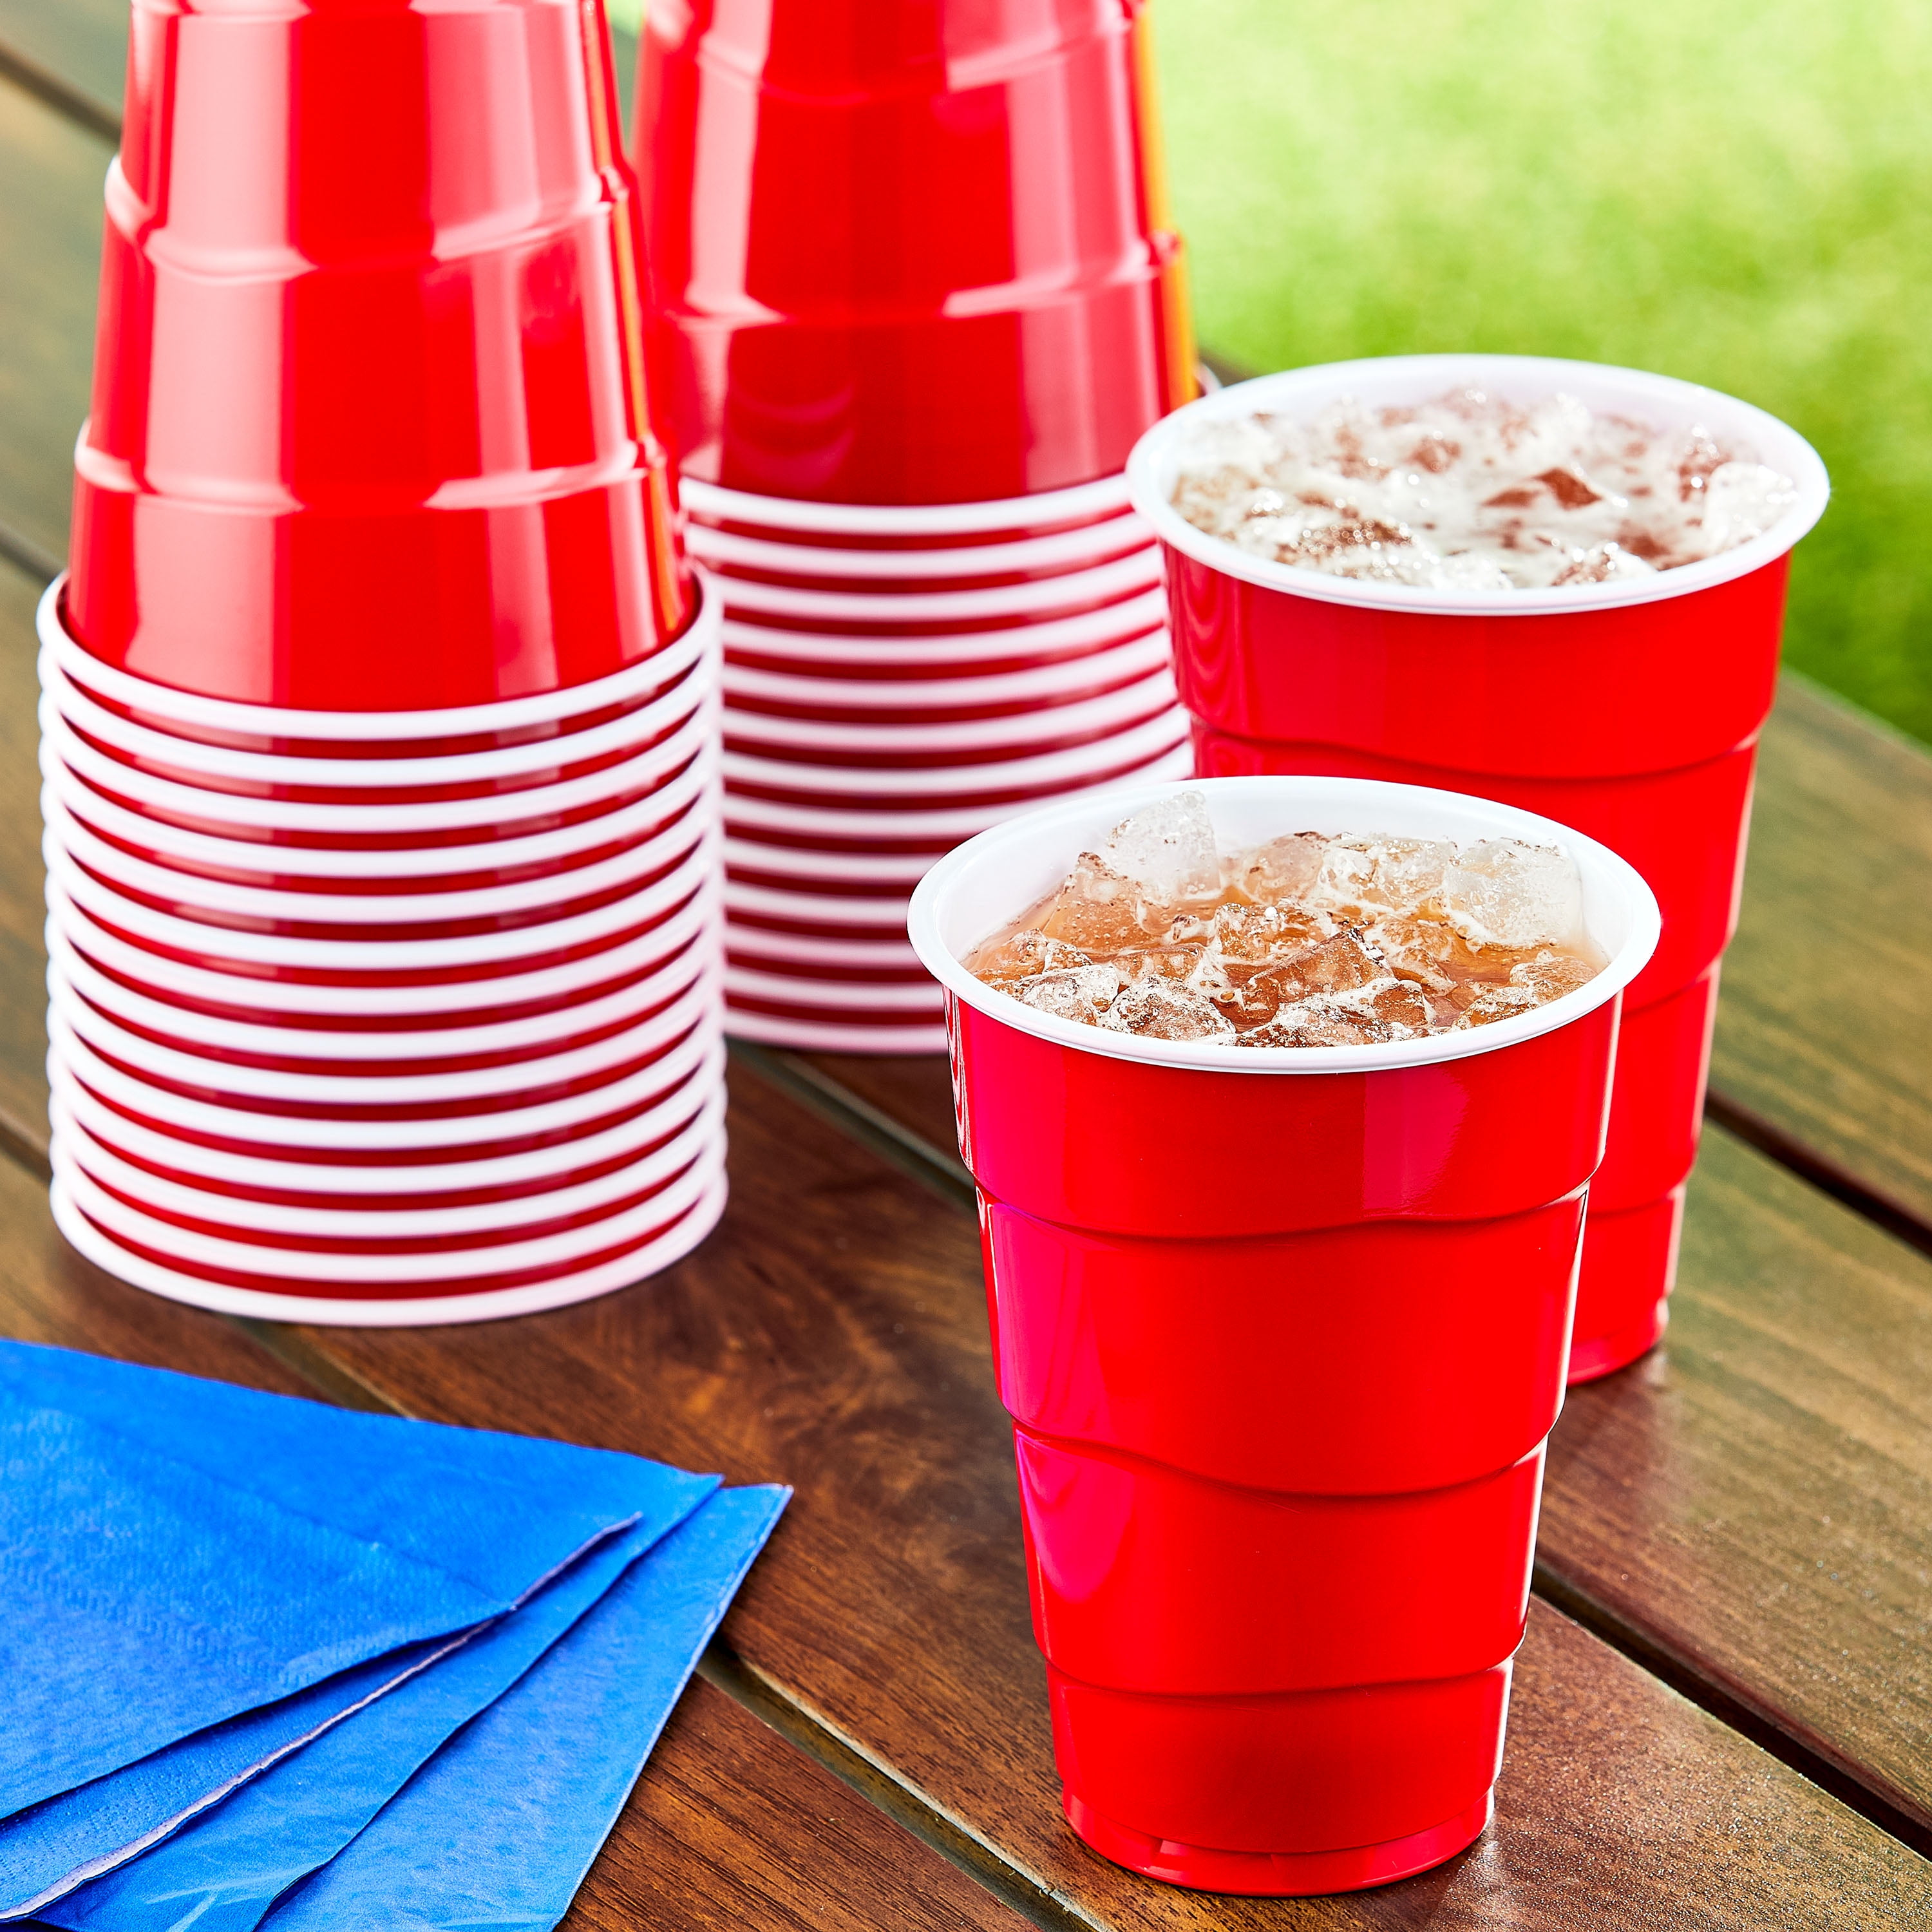 Member's Mark 18 Ounce Red Heavy Duty Cups - 240 ct